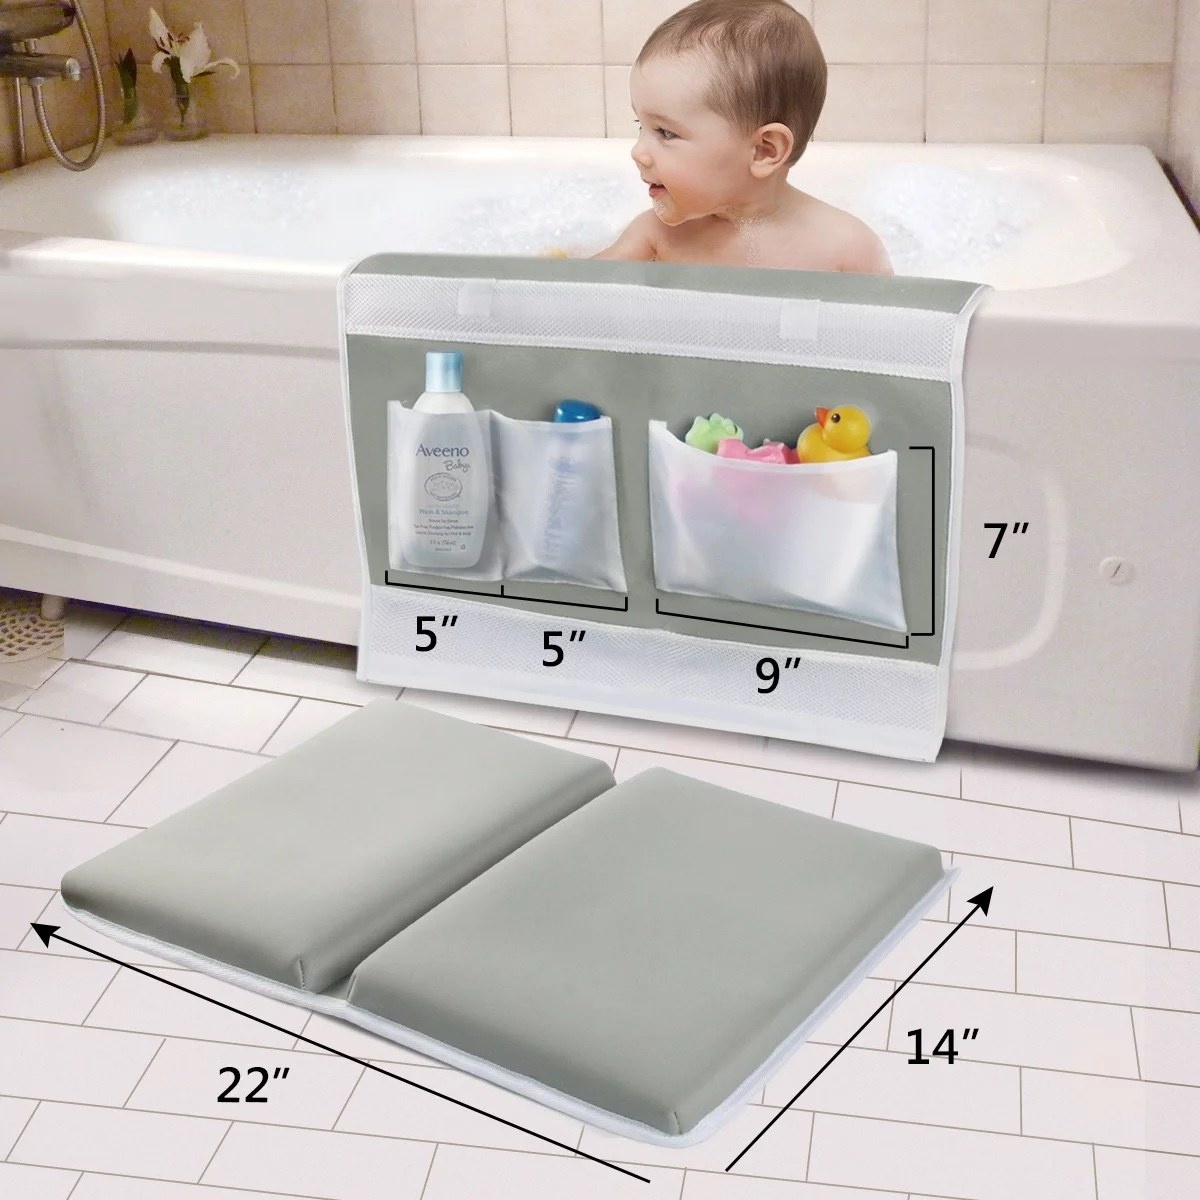 a baby sits in the bath tub, the kneeler is on the bath tub